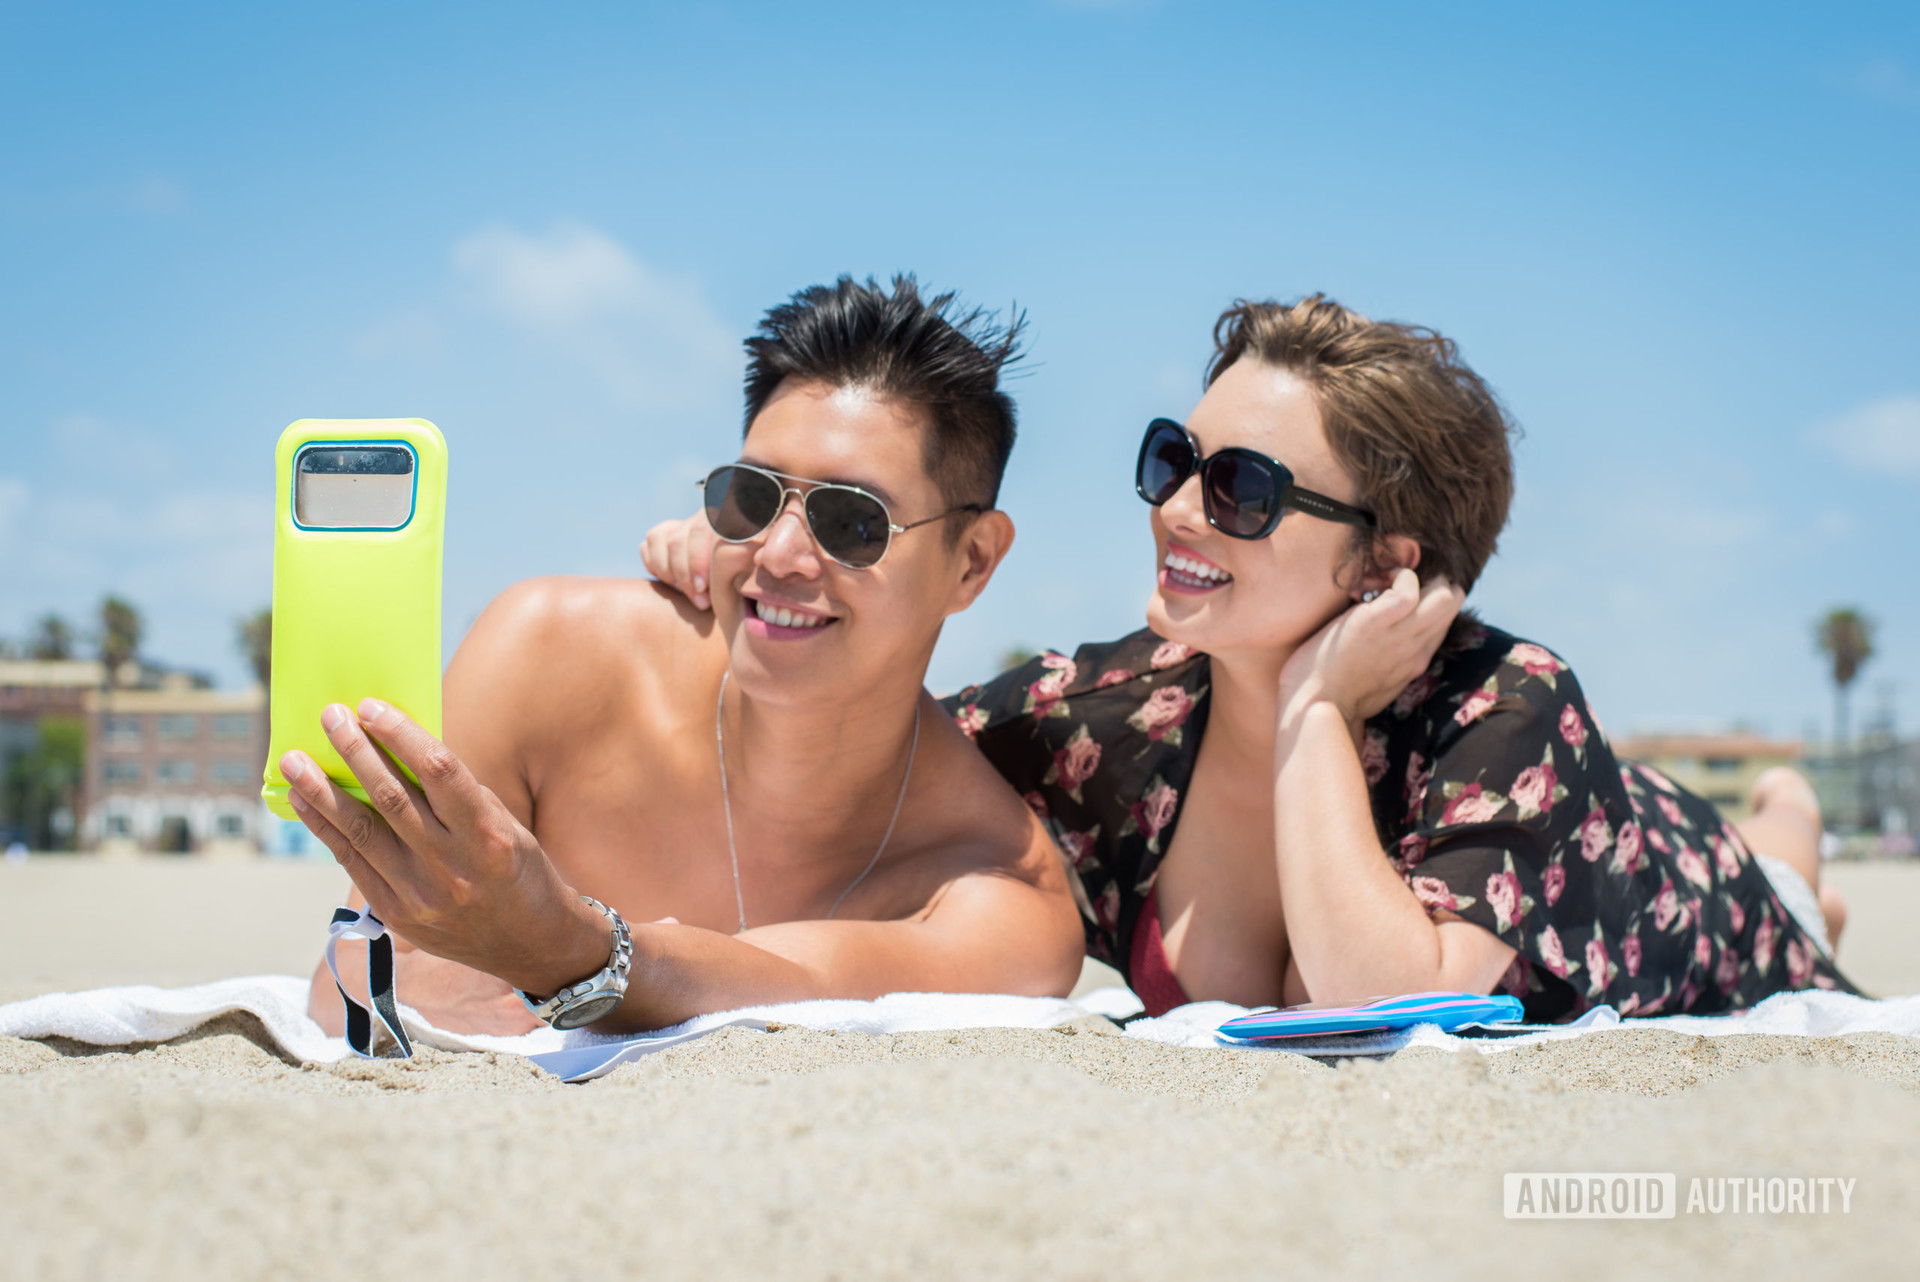 A man holding a yellow CaliCase waterproof pouch while a woman looks on next to him. They are both on the beach.